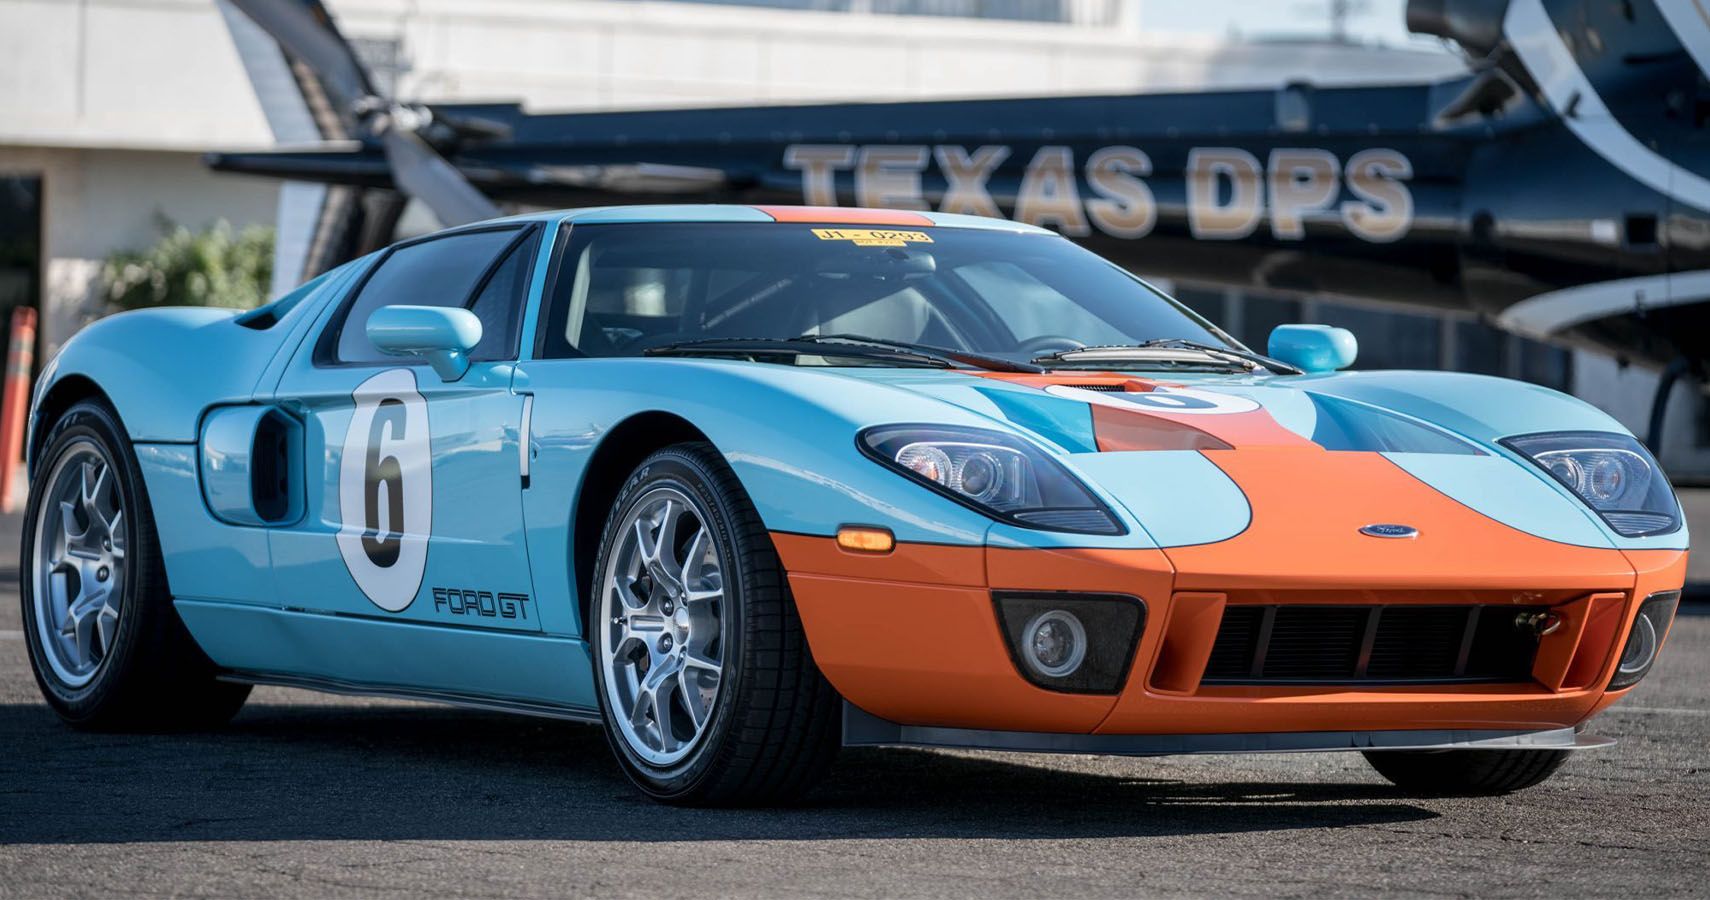 2006 Ford GT Heritage Edition 162 Miles